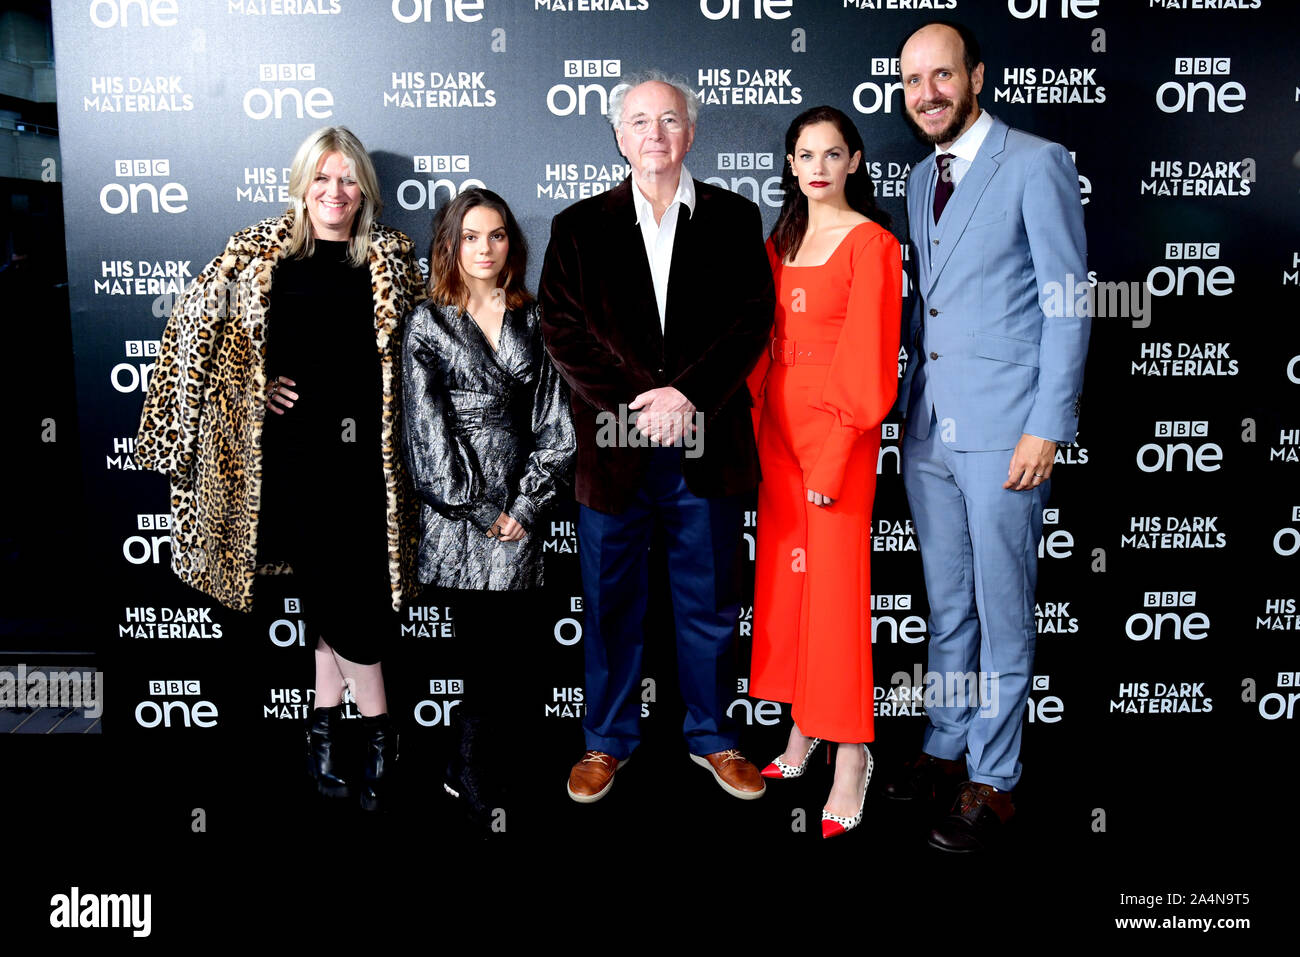 (Left to right) Jane Tranter, Dafne Keen, Philip Pullman, Ruth Wilson and Jack Thorne attending the premiere of His Dark Materials held at the BFI Southbank, London. Stock Photo